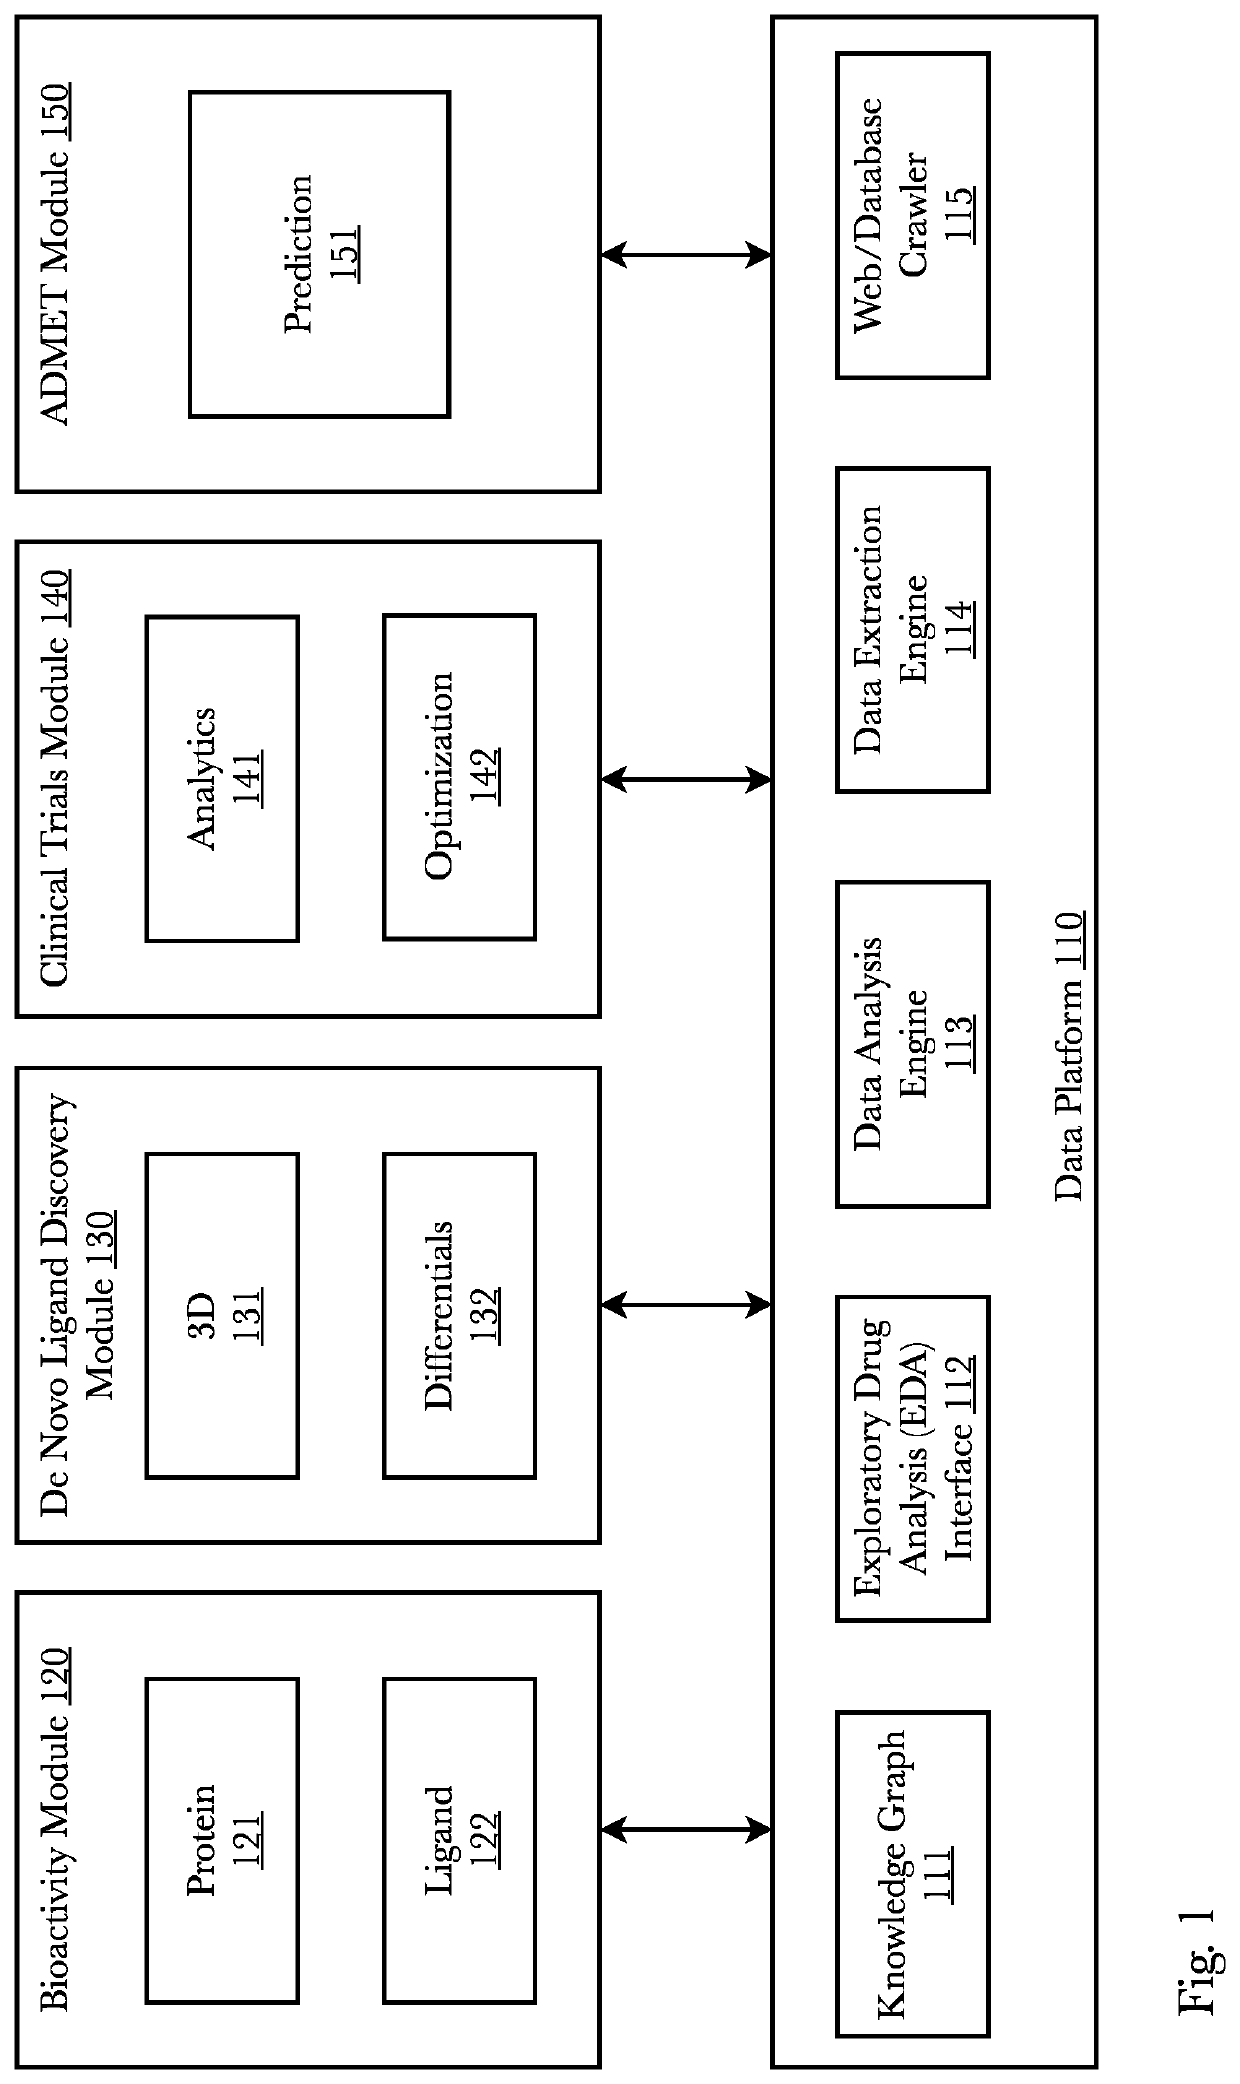 System and method for clinical trial analysis and predictions using machine learning and edge computing